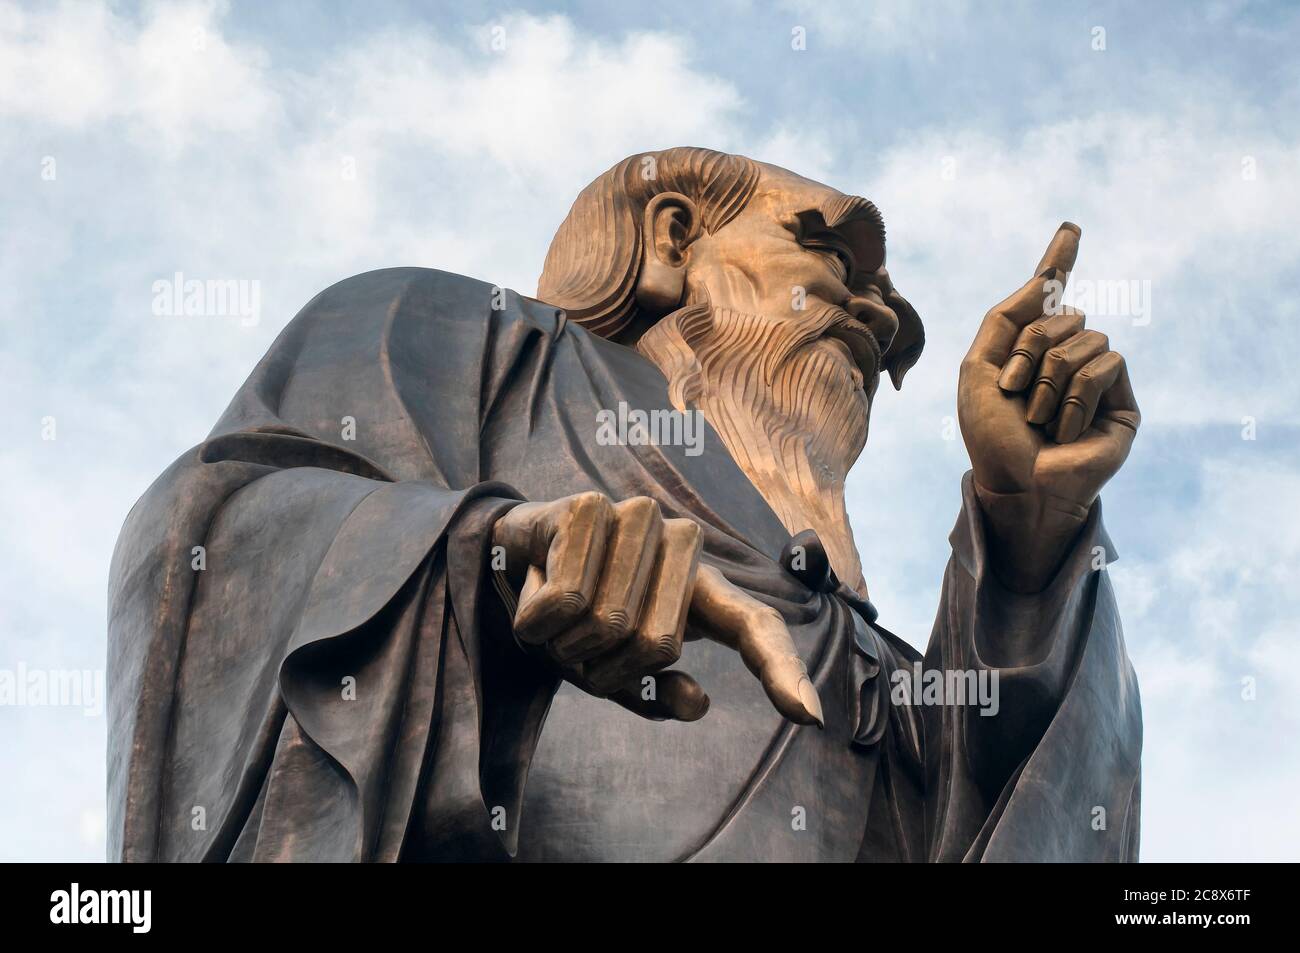 the founder of taoism laozi large statue within the taiqing palace scenic area in Qingdao, China, shandong province Stock Photo